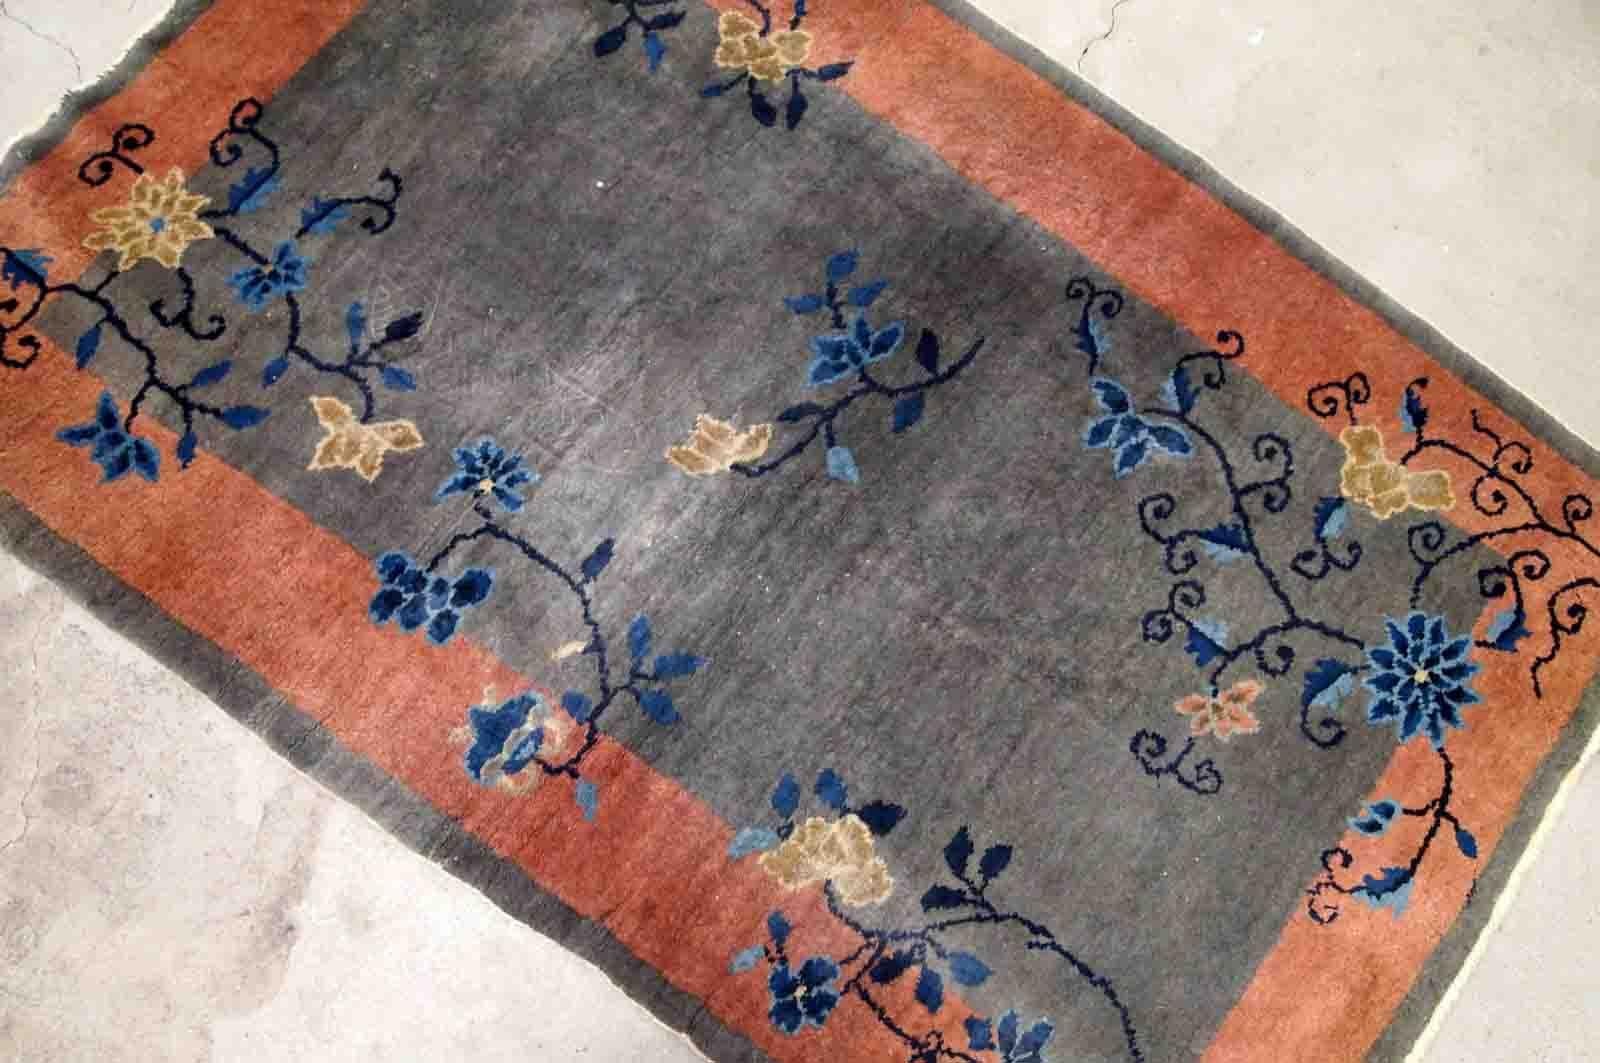 Handmade antique Art Deco Chinese rug in red and grey shades. The rug is from the beginning of 20th century in original good condition.

-condition: original good,

-circa: 1920s,

-size: 3.1' x 4.10' (94cm x151cm),
?
-material: